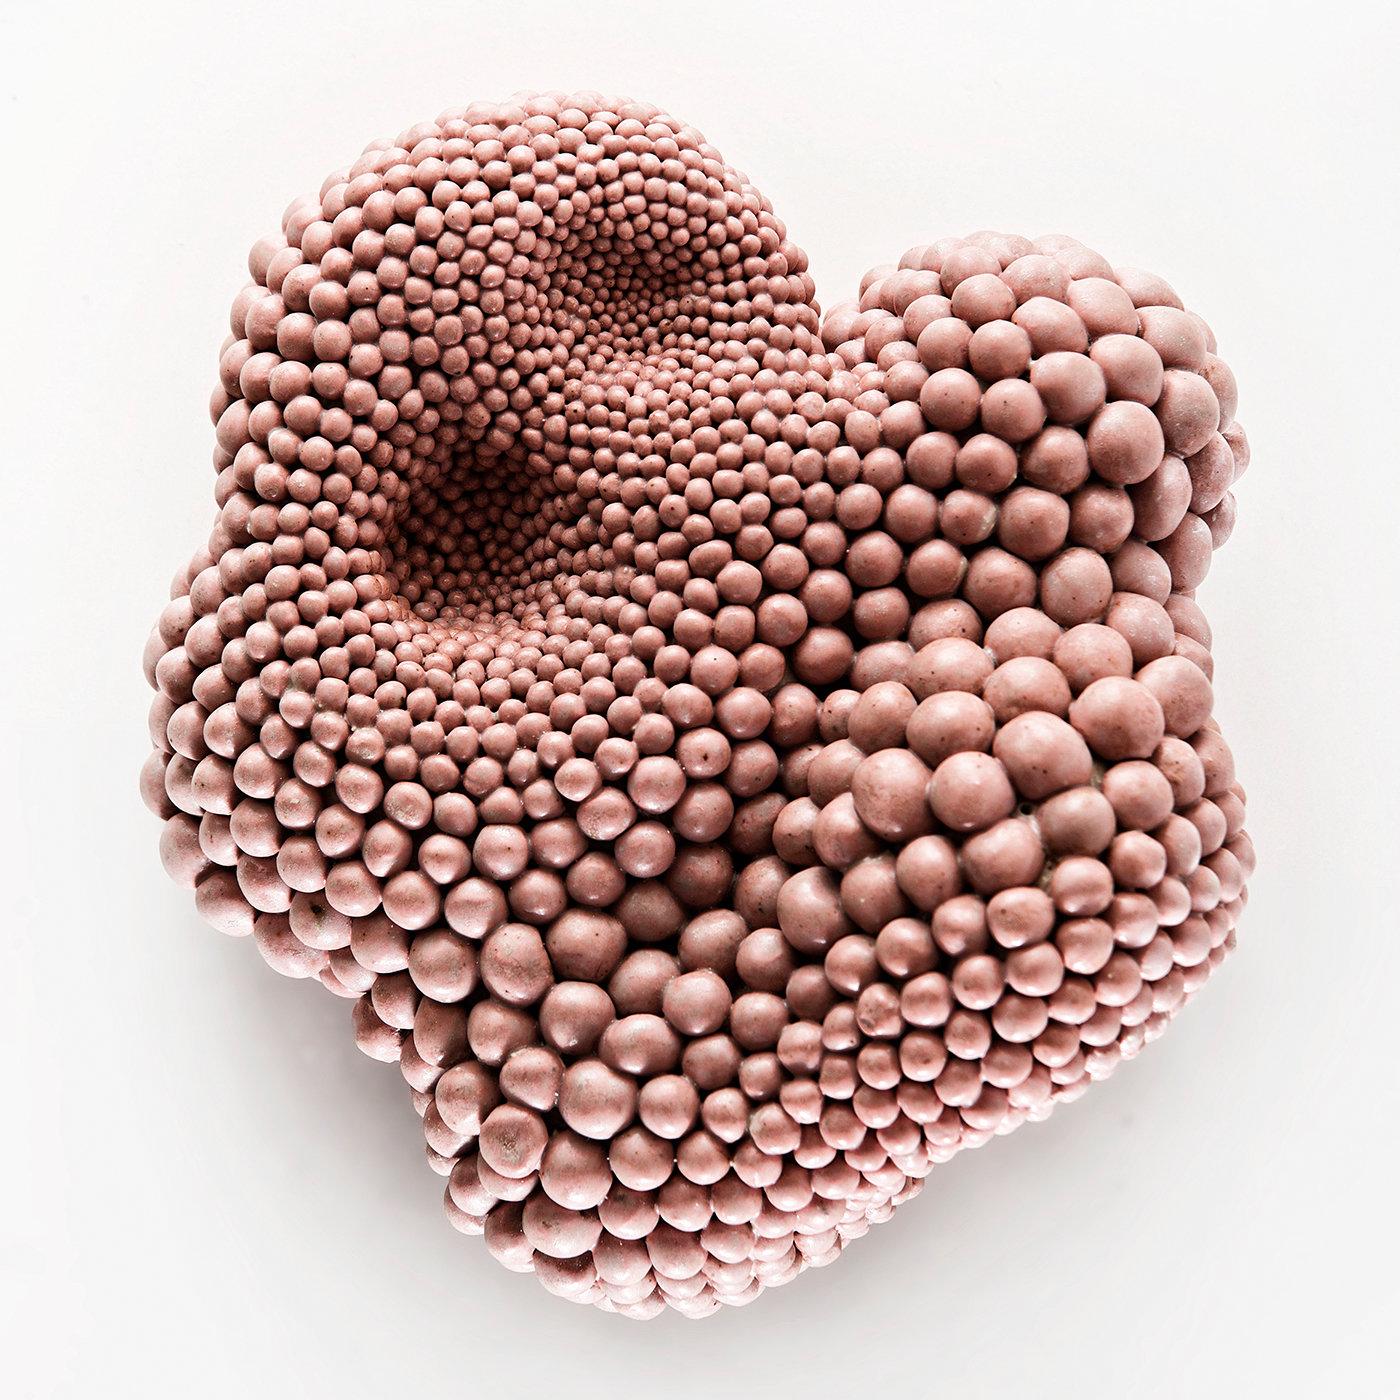 Unique and evocative, this sculpture is characterized by a natural, coral-inspired shape with an irregular and textured surface. The grès is modeled and shaped, the individual beads of varying sizes arranged to give the illusion of depth. Entirely